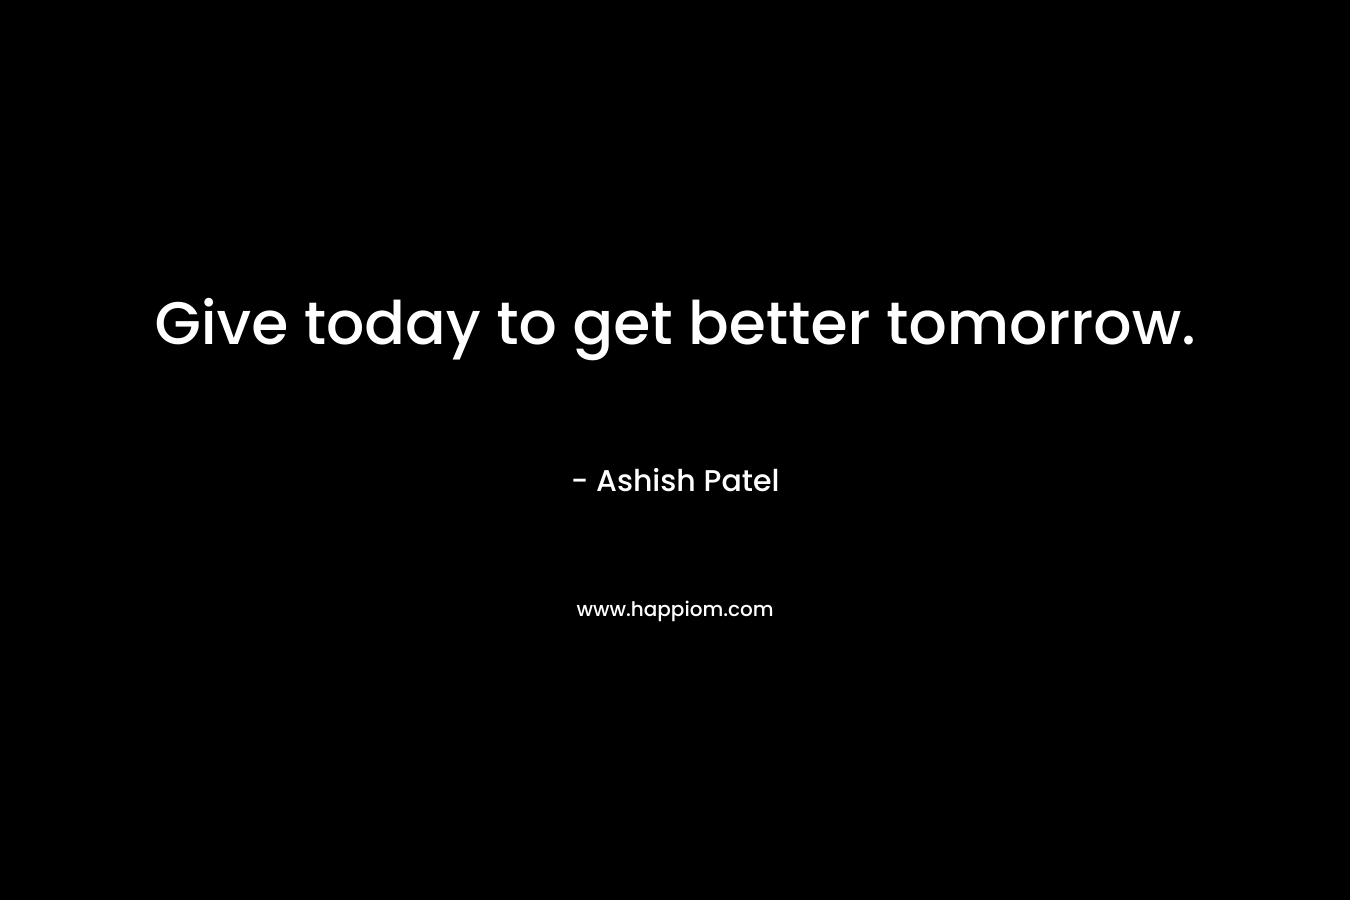 Give today to get better tomorrow.